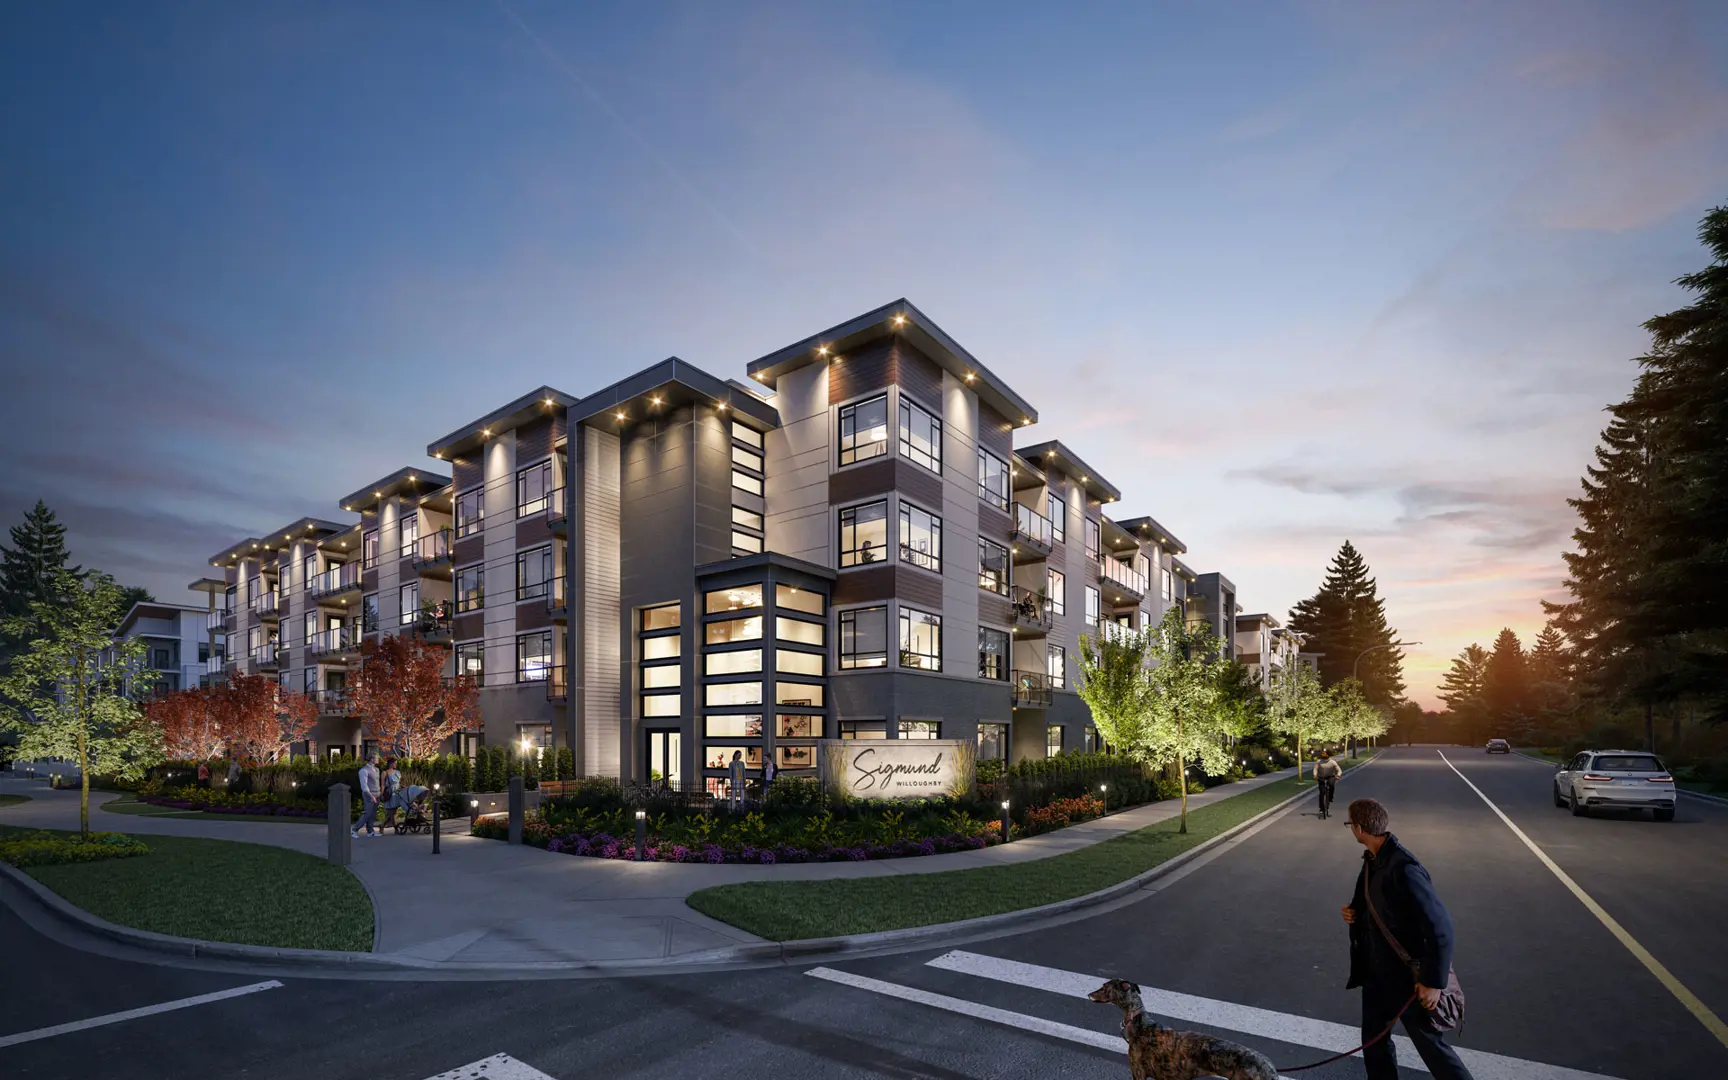 Sigmund Willoughby Condos located at 72 Avenue & 72B Avenue, Langley Township, BC image